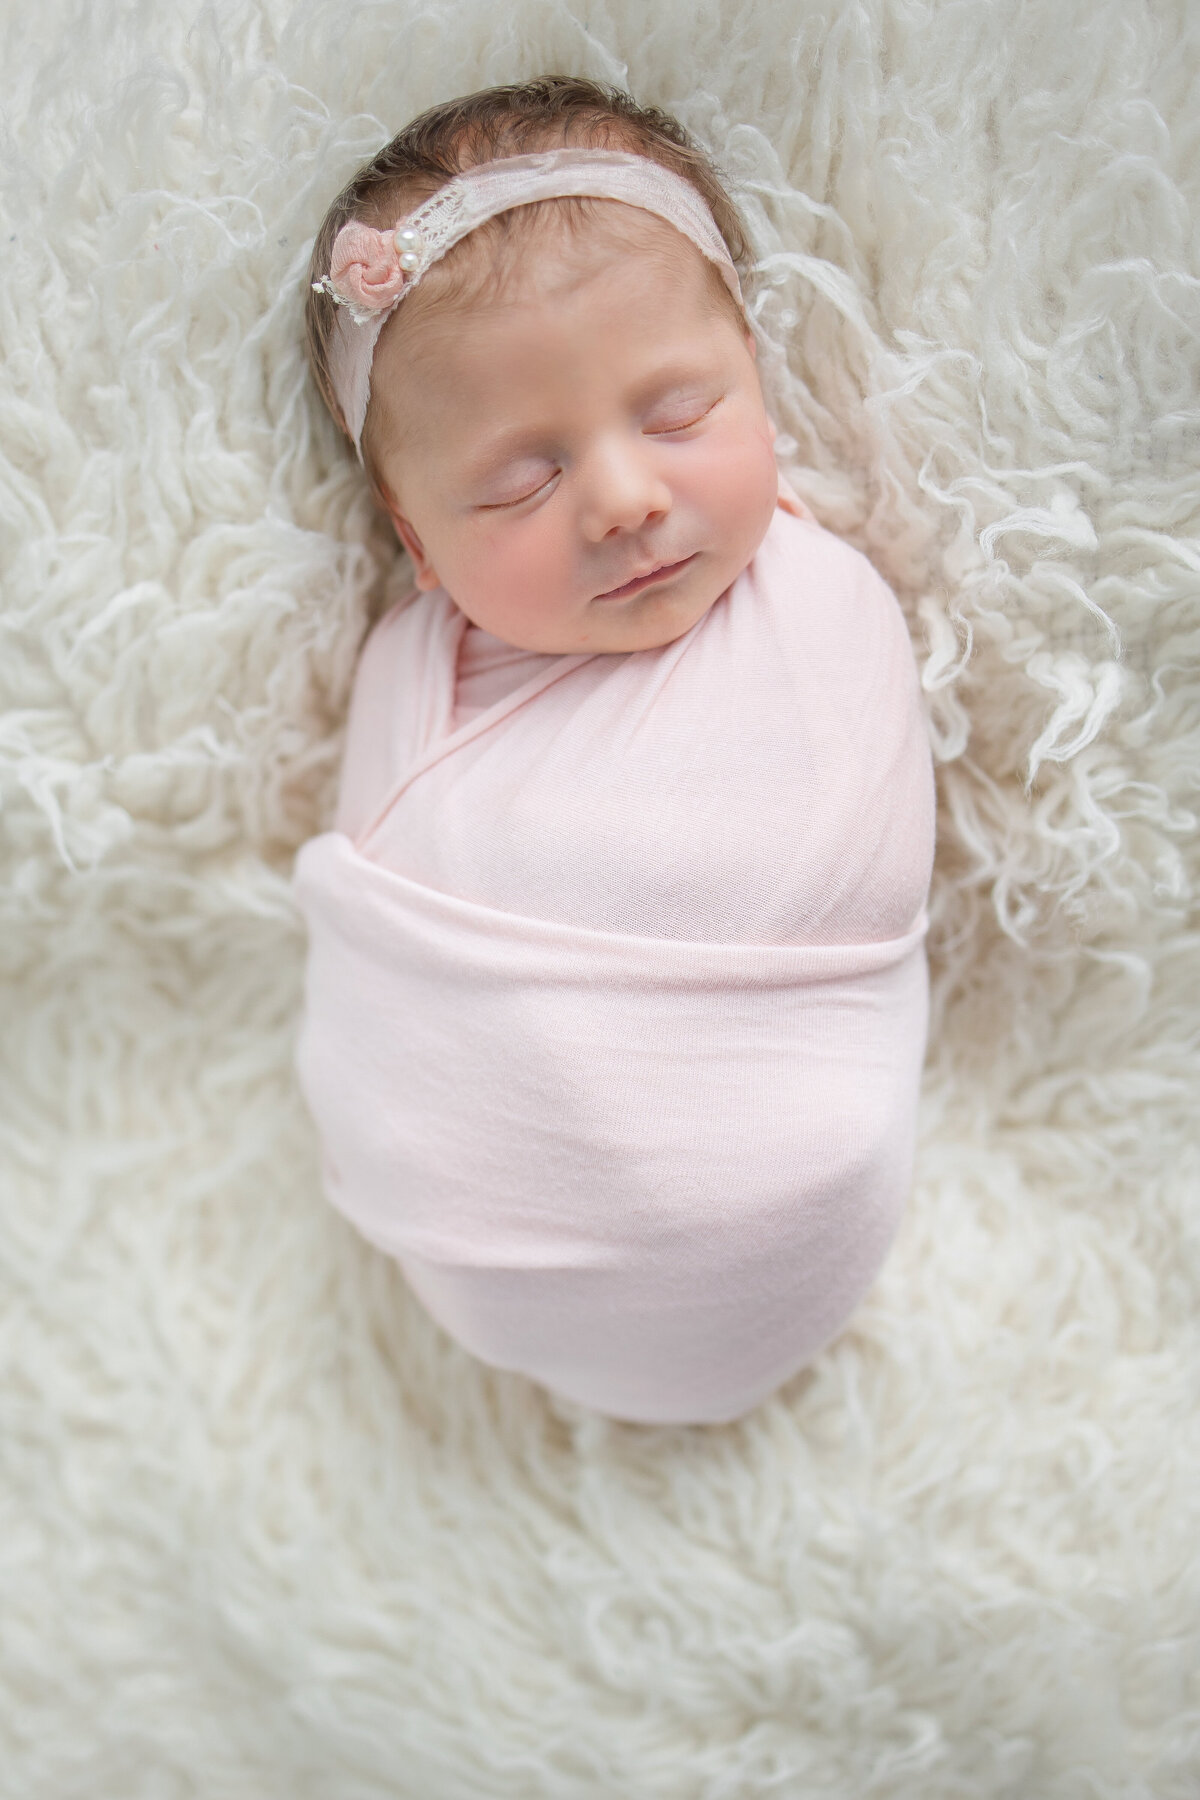 horizons-west-newborn-photographer-travels-to-your-home 0527